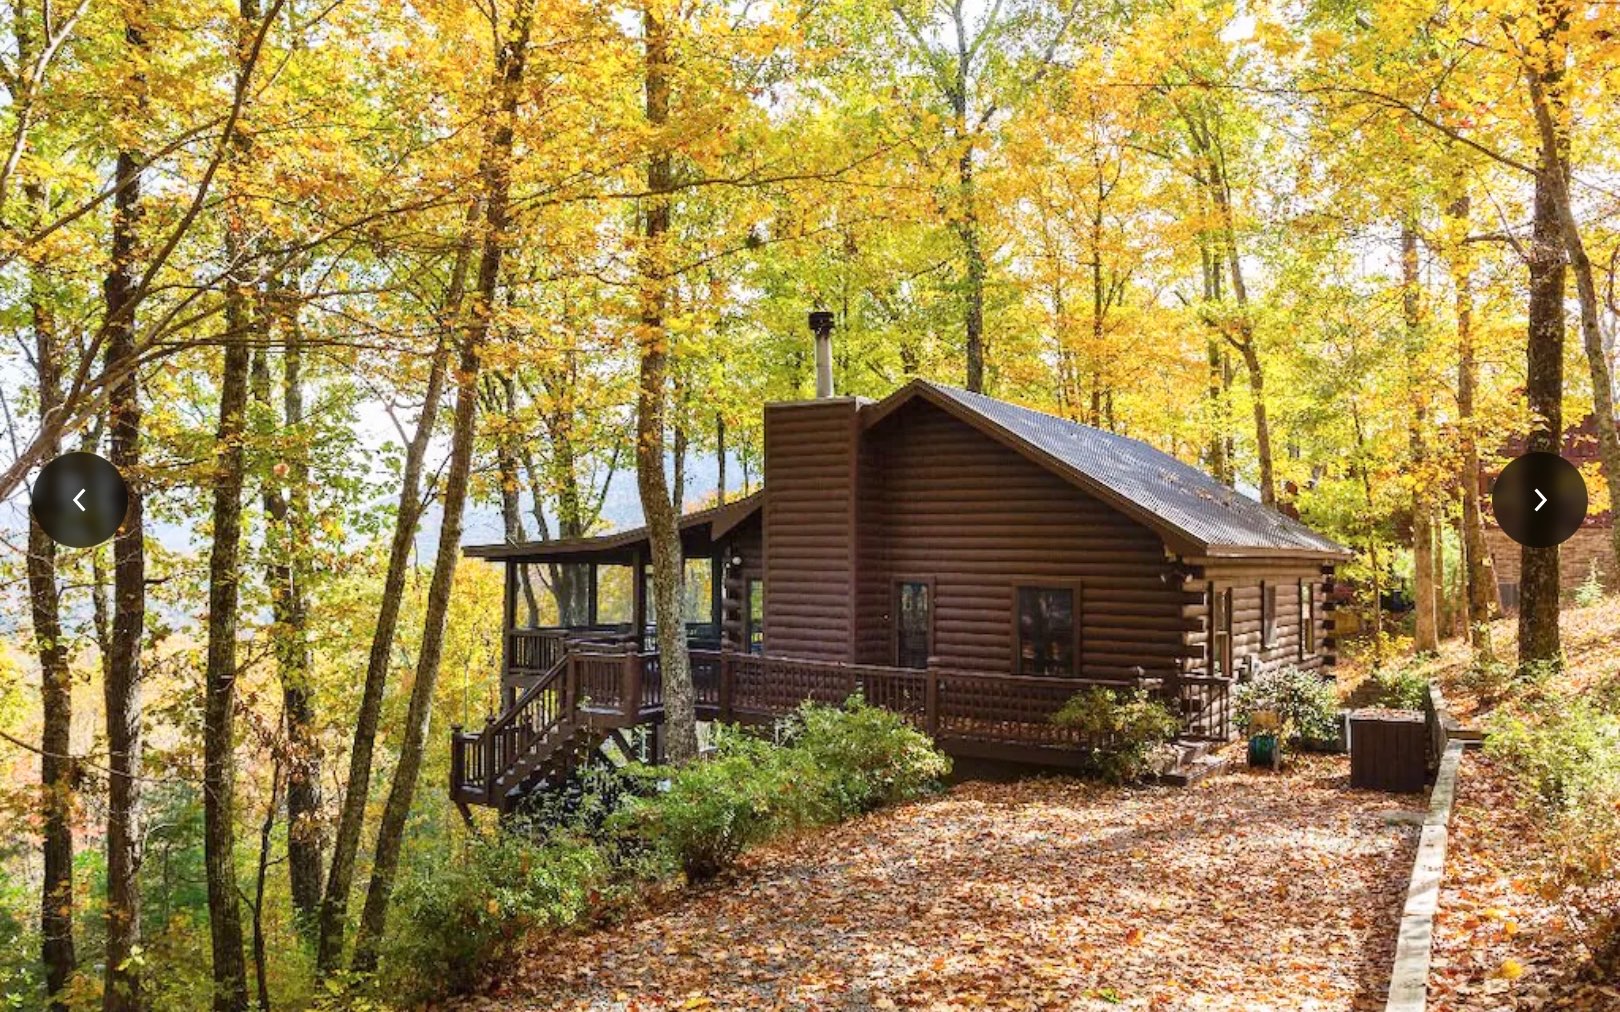 Location, Location, Location. This cabin has the right location in soo many ways. First its located only an hour and 15 mins from hwy 285 in Atlanta. Second nestled right between Blue Ridge and Ellijay. The cabin is located near the top of the mountain on an all paved dead end street. Rocking chairs on the screened in porch while listening to the sounds of nature. Year round Long range views of the Aska Adventure National park. It doesn't get any better. There are 2 bedrooms on the main level and a loft area that is being used currently as an extra sleeping area. There are no restrictions for short term rentals in the community and this cabin has currently 162 reviews on VRBO with a 4.9 rating out of 5!! Cabin generated 103k in gross revenue over the past 2 years. Cabin was re-stained this past year and is in excellent condition. Furniishings negotiable on separate bill of sale.